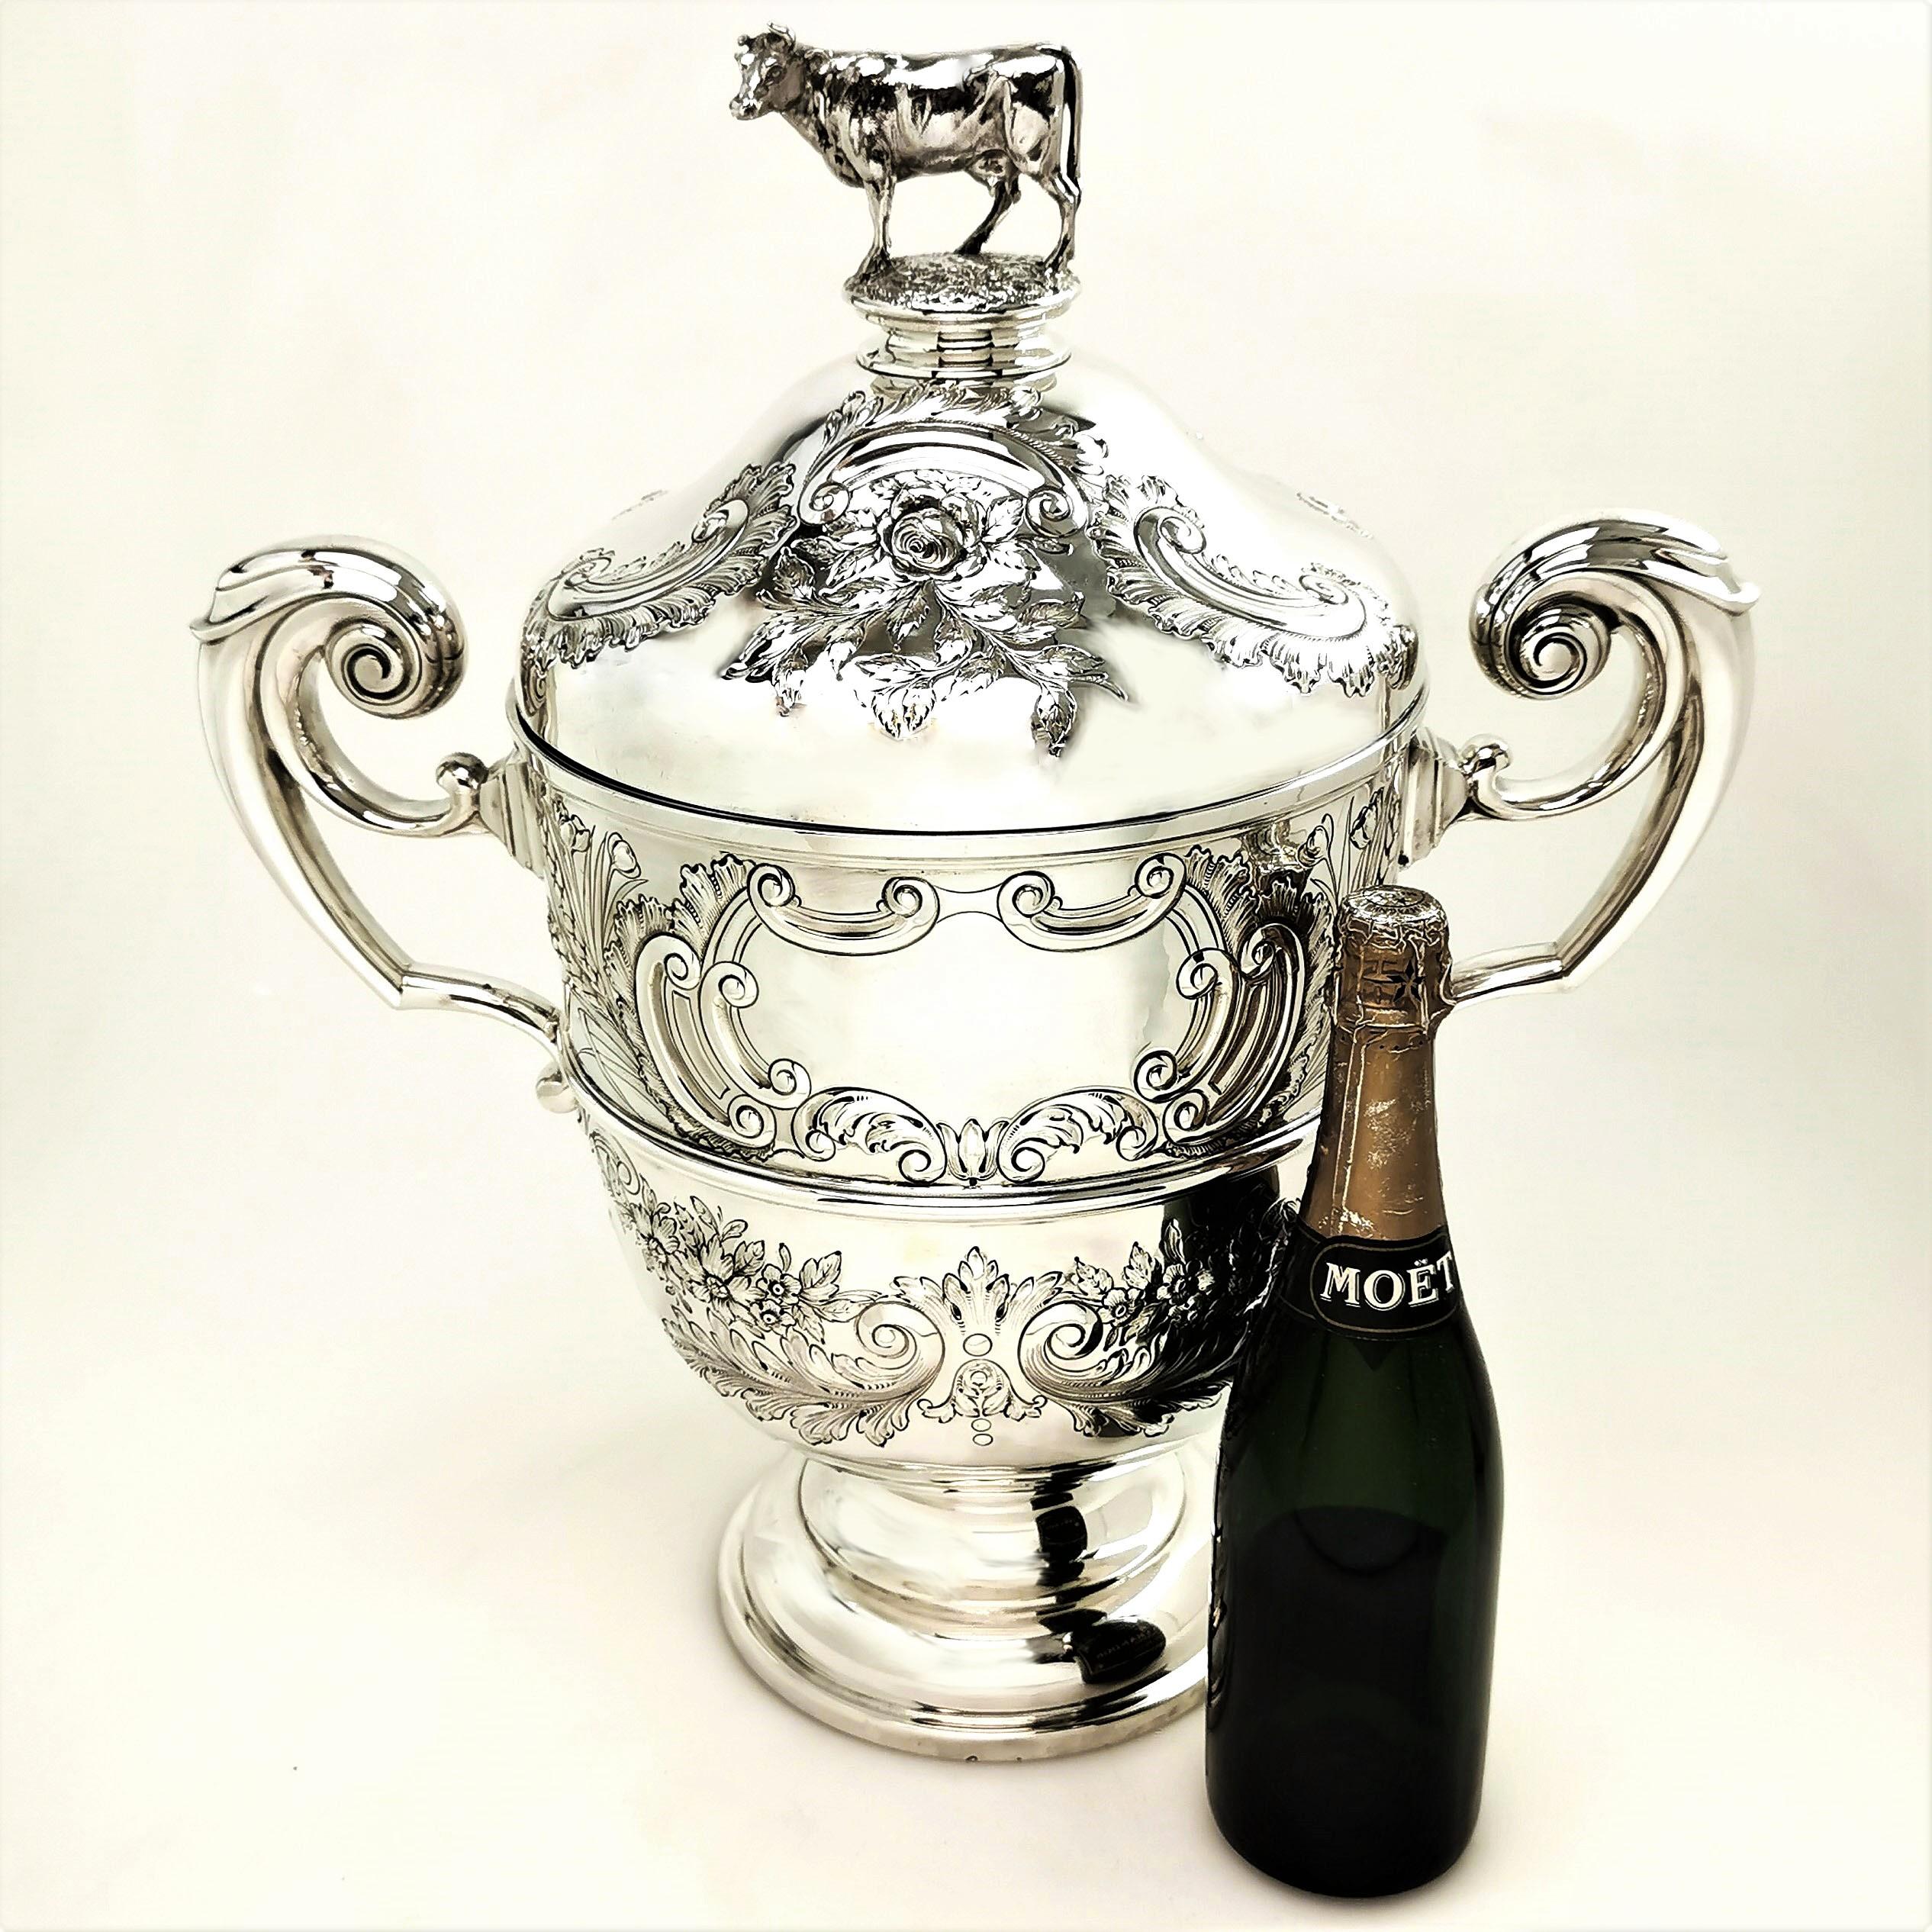 This enormous Antique Solid Silver Cup & Cover features a lovely chased design on the body and fitted lid. The lid has a cow figure as a finial and the Trophy has two extremely large scroll handles. The Cup has a blank cartouche on the one side